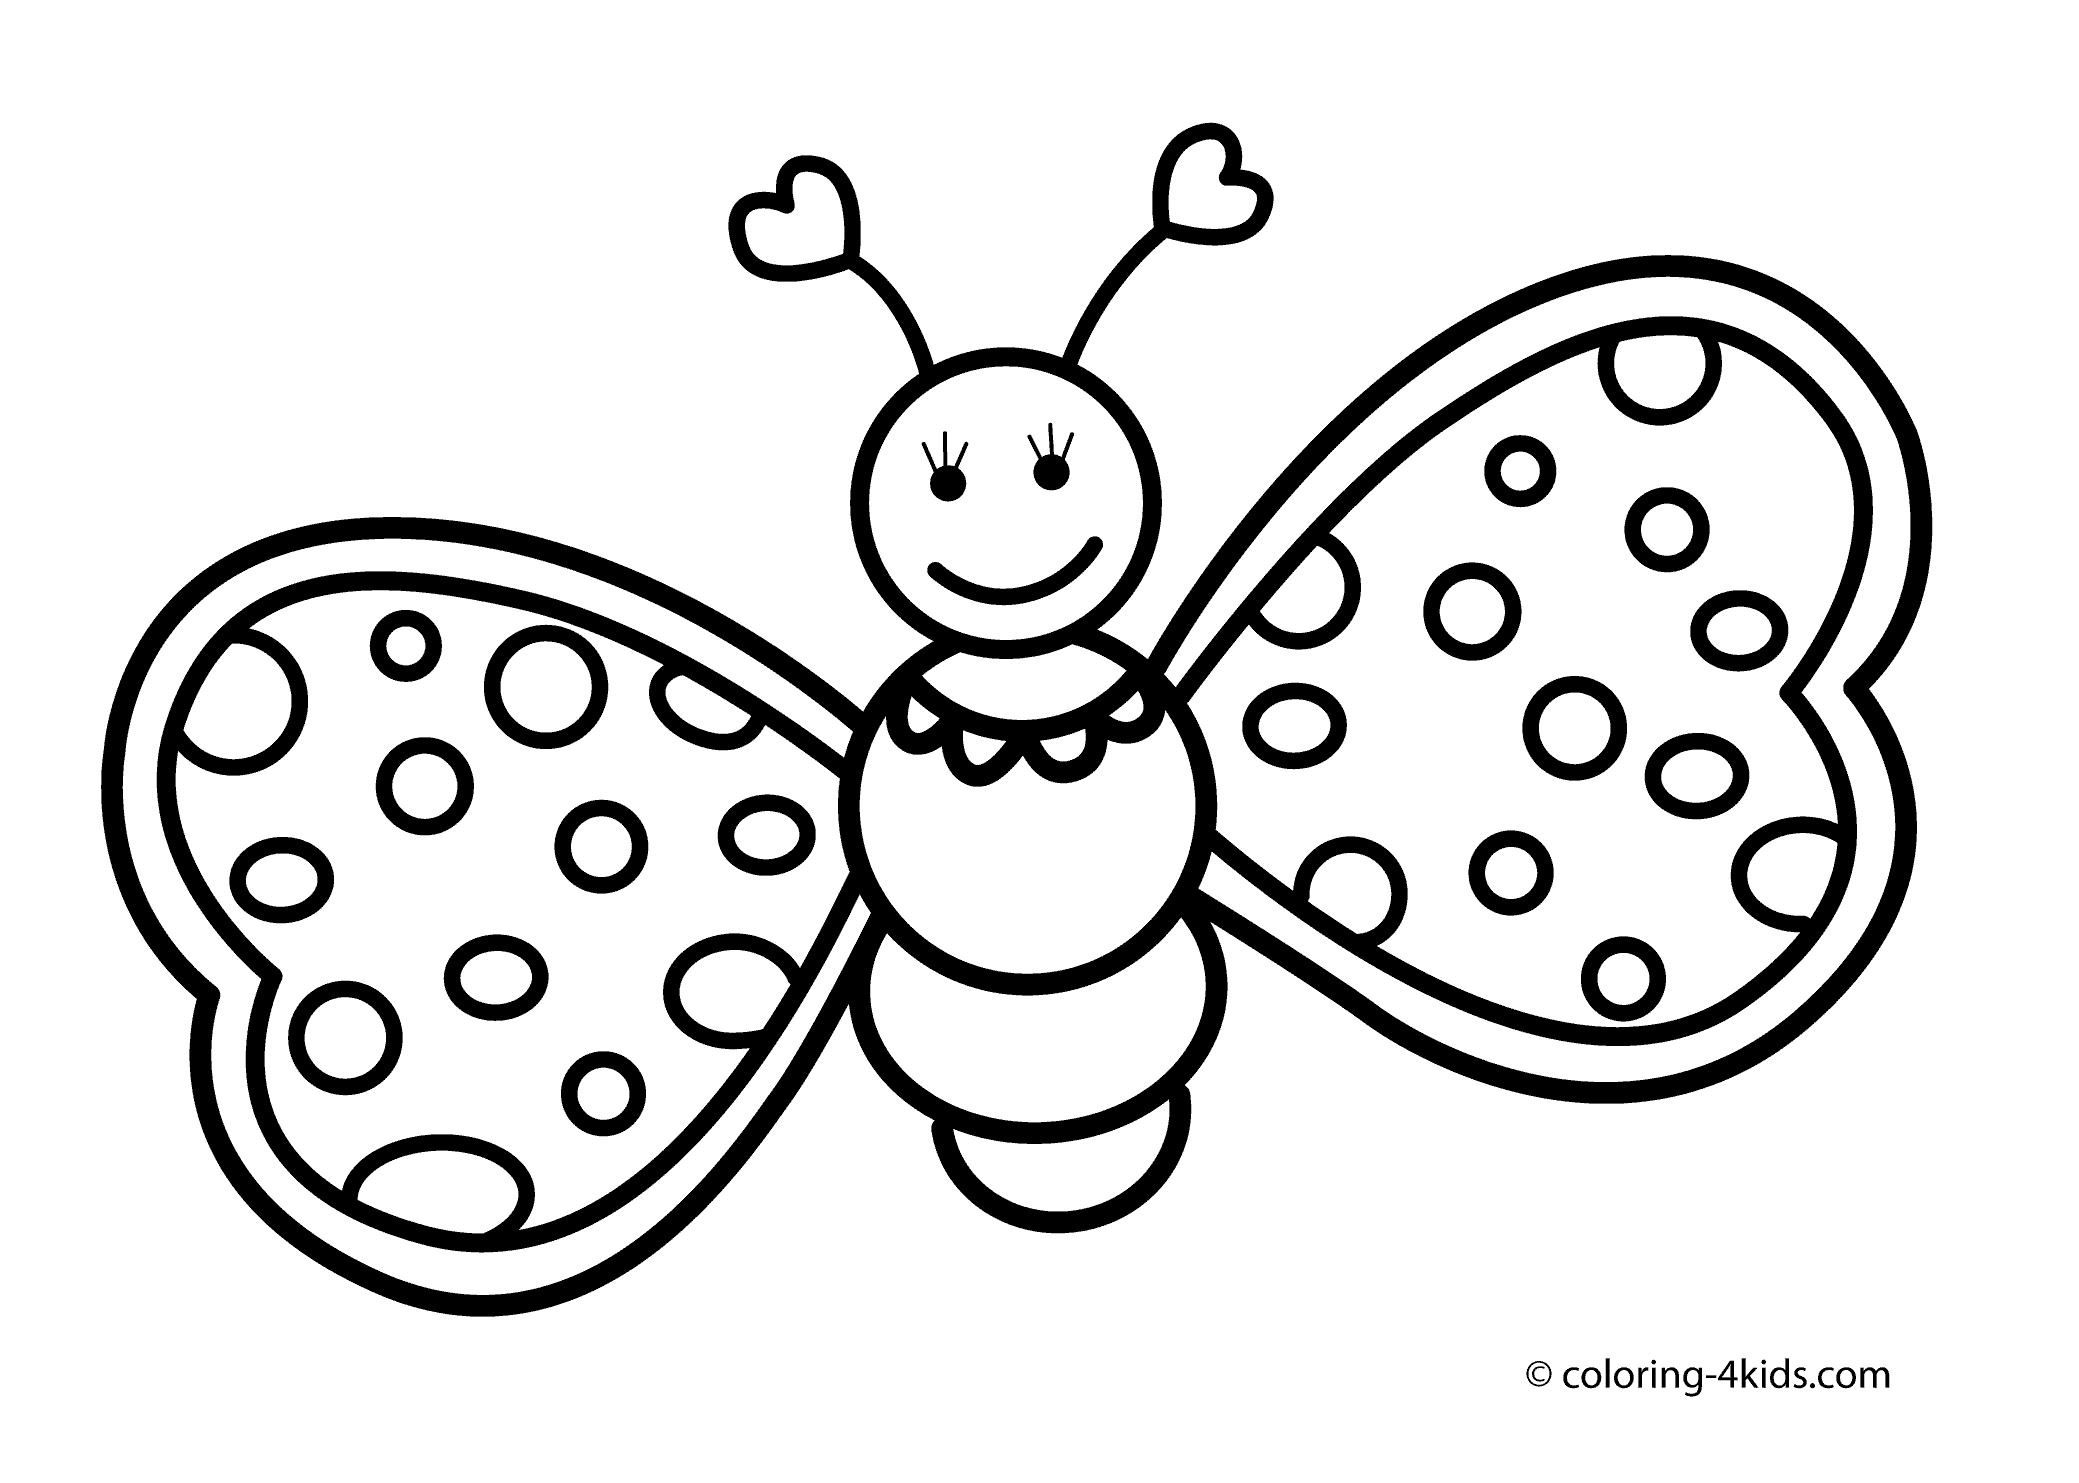 pic-of-butterfly-simple-in-black-n-white-for-colouring-for-kindergarten